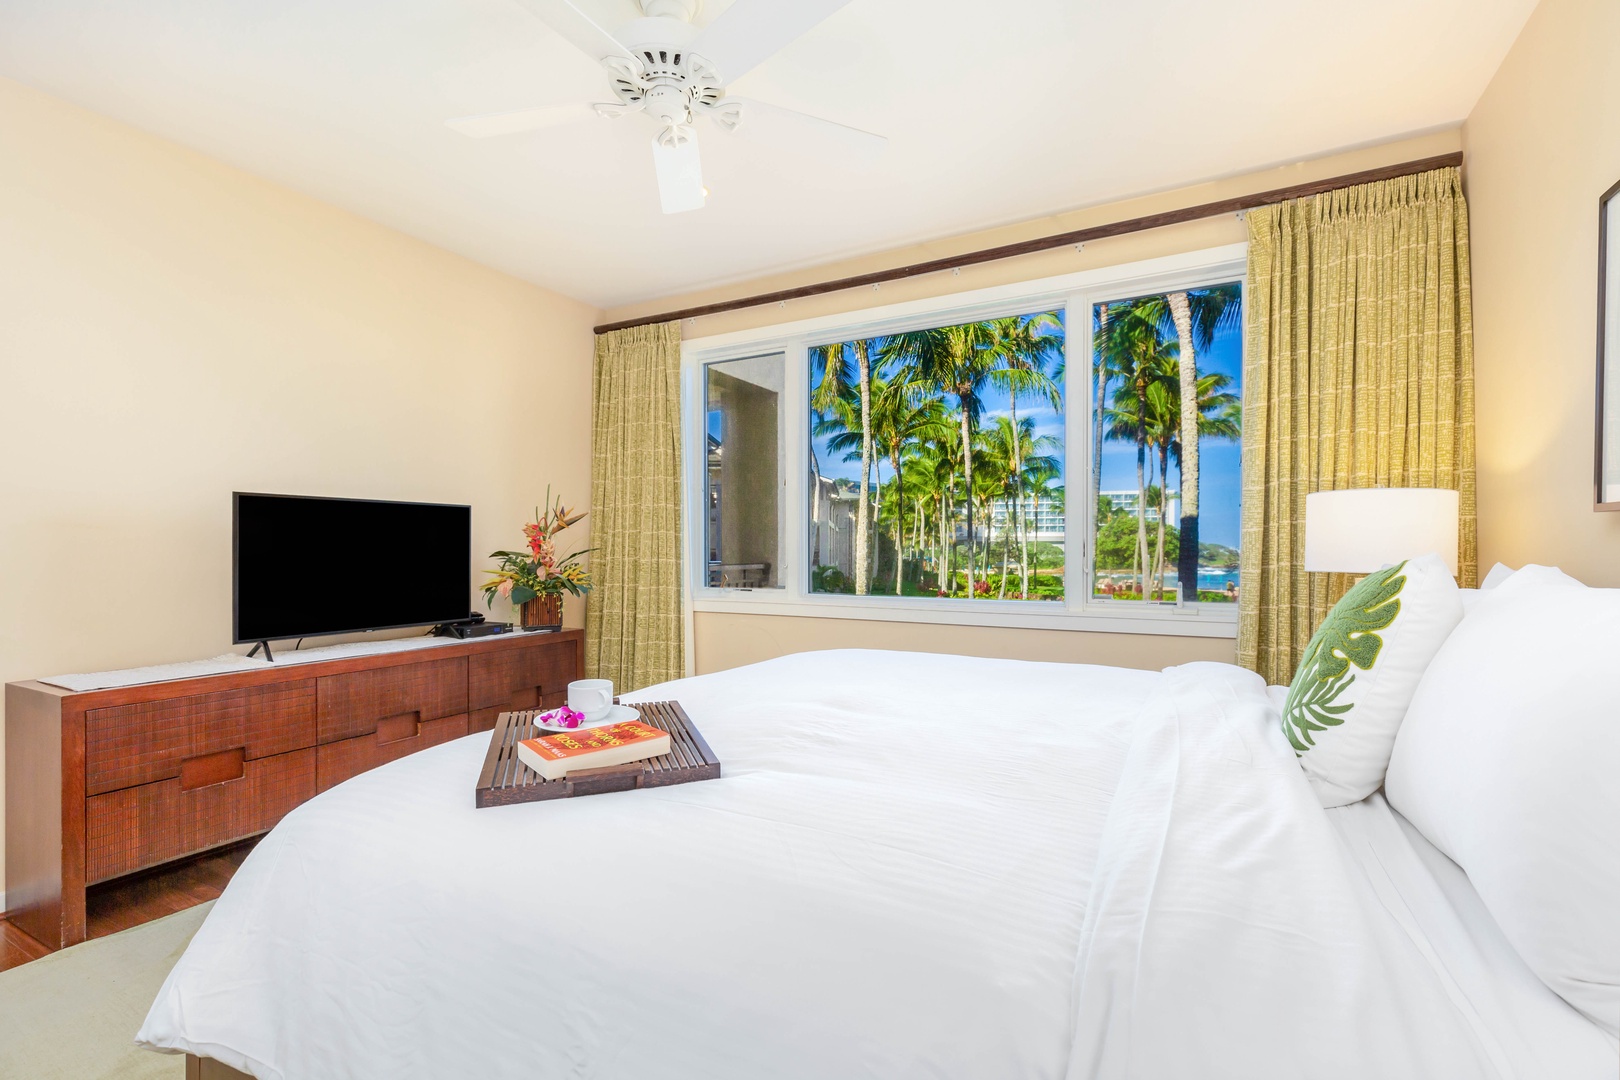 Kahuku Vacation Rentals, Turtle Bay Villas 210 - Each bedroom has a tv and the Master also has Ocean view